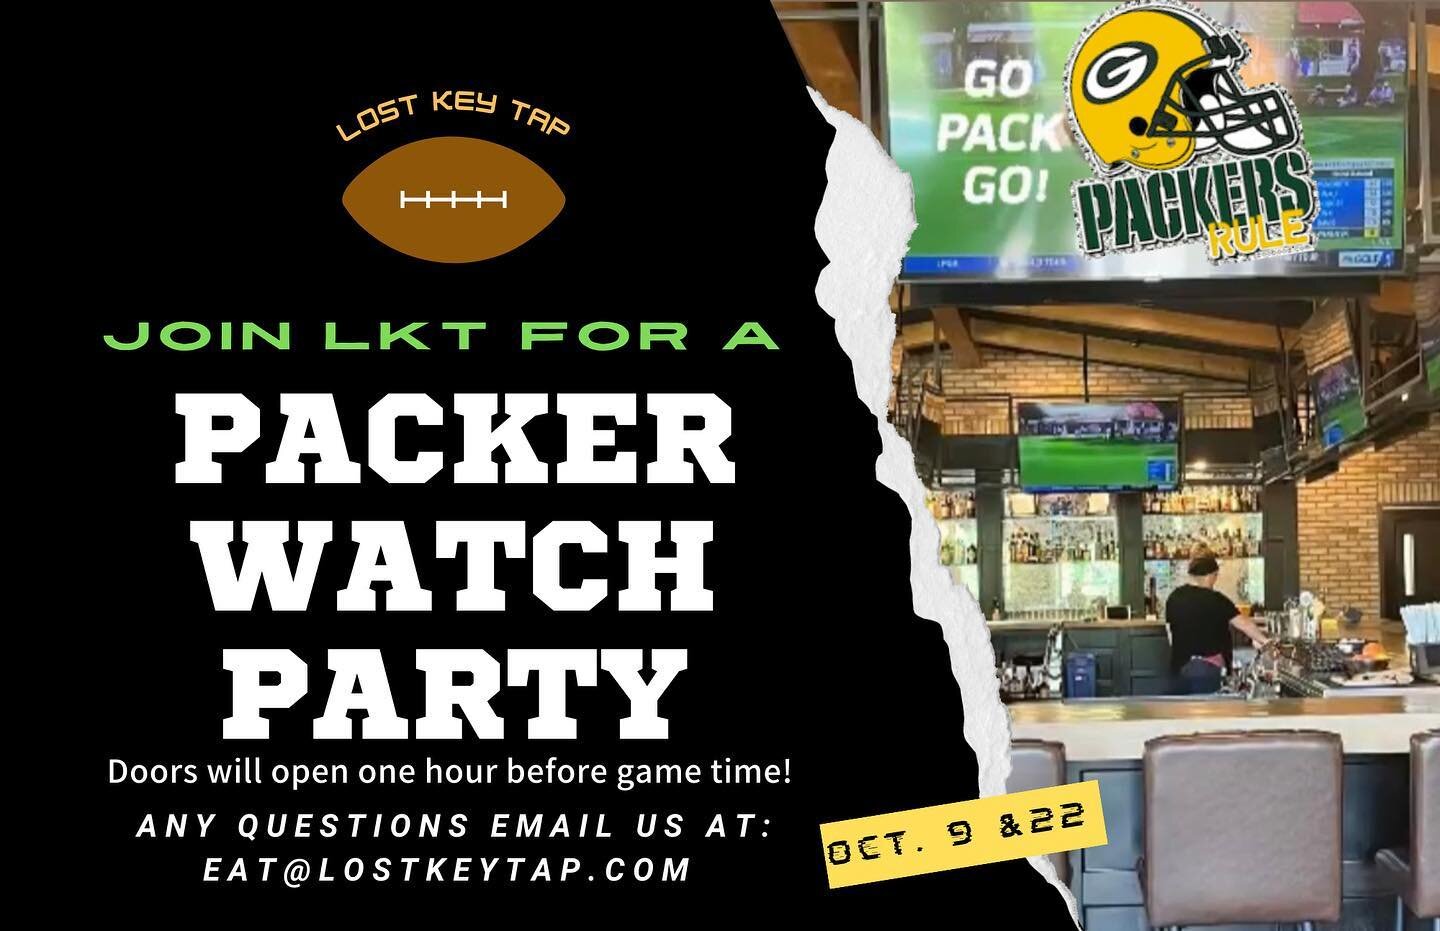 💚💛 We are excited to host Packer watch parties! During the away games in October (10/9 and 10/22) join us to watch the game! We will have the bar open, drink specials, and game time snacks! 
Doors will open one hour before the game for pregame drin